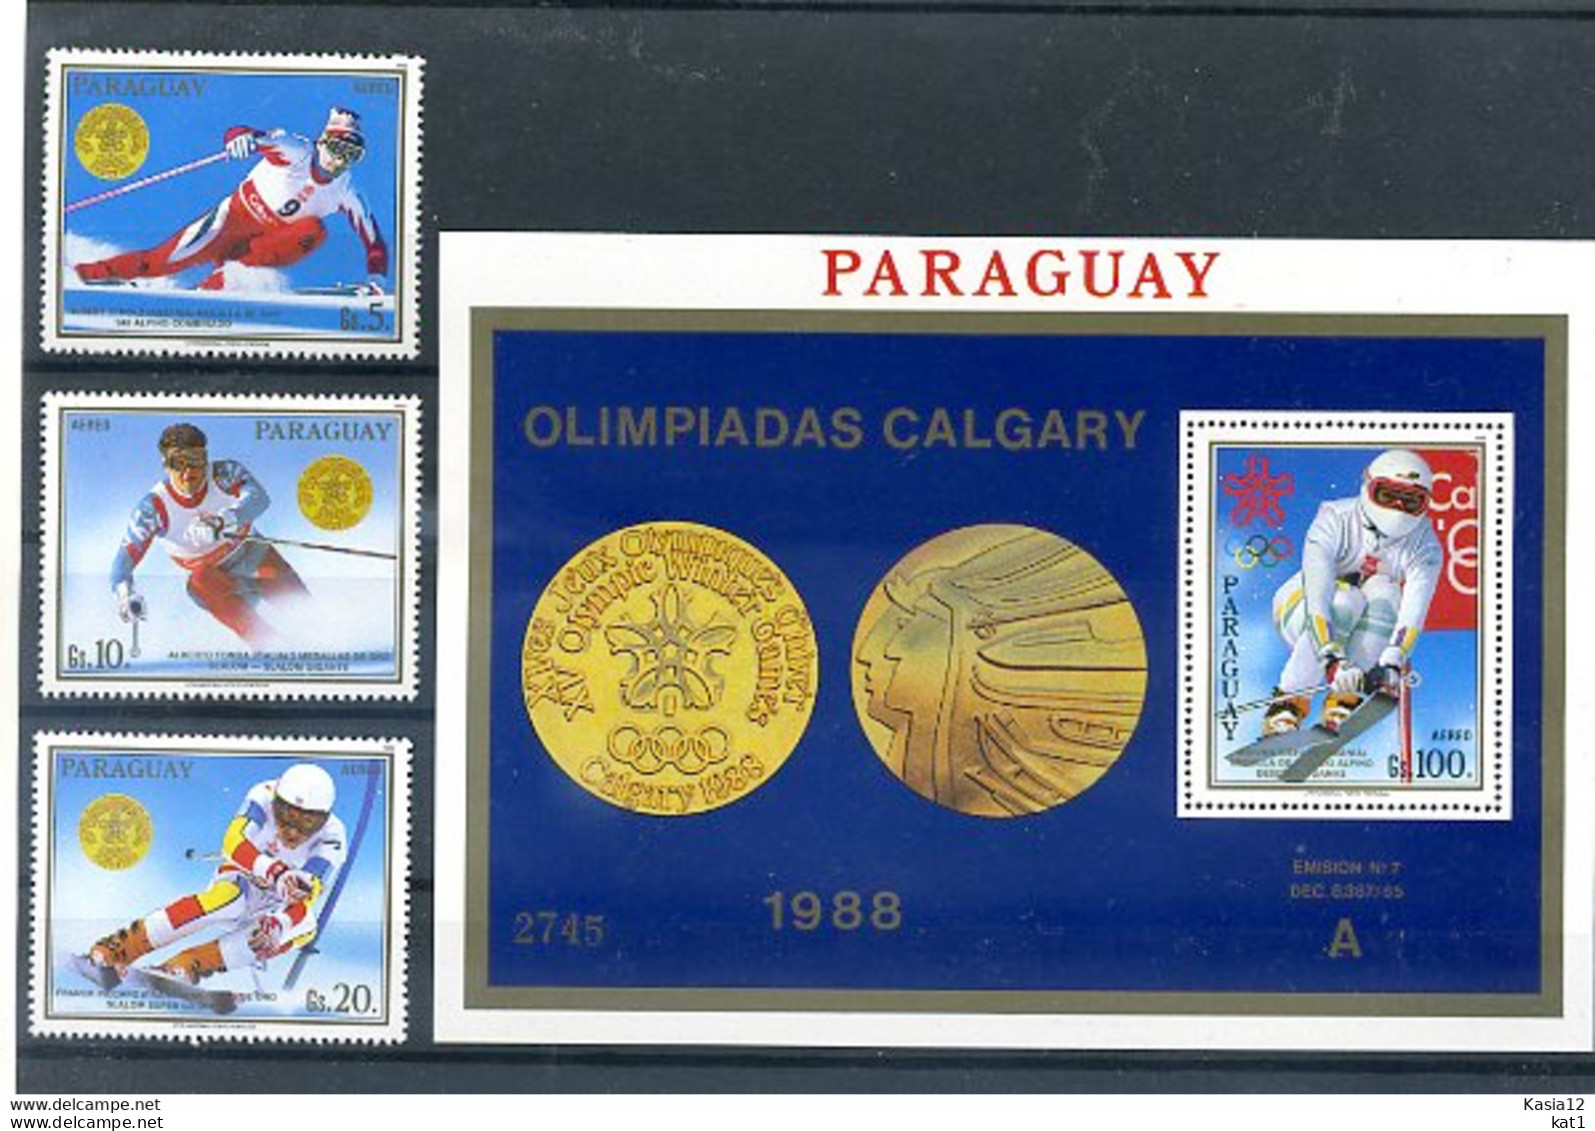 A17729)Olympia 88: Paraguay 4262 - 4264** + Bl 453** - Winter 1988: Calgary